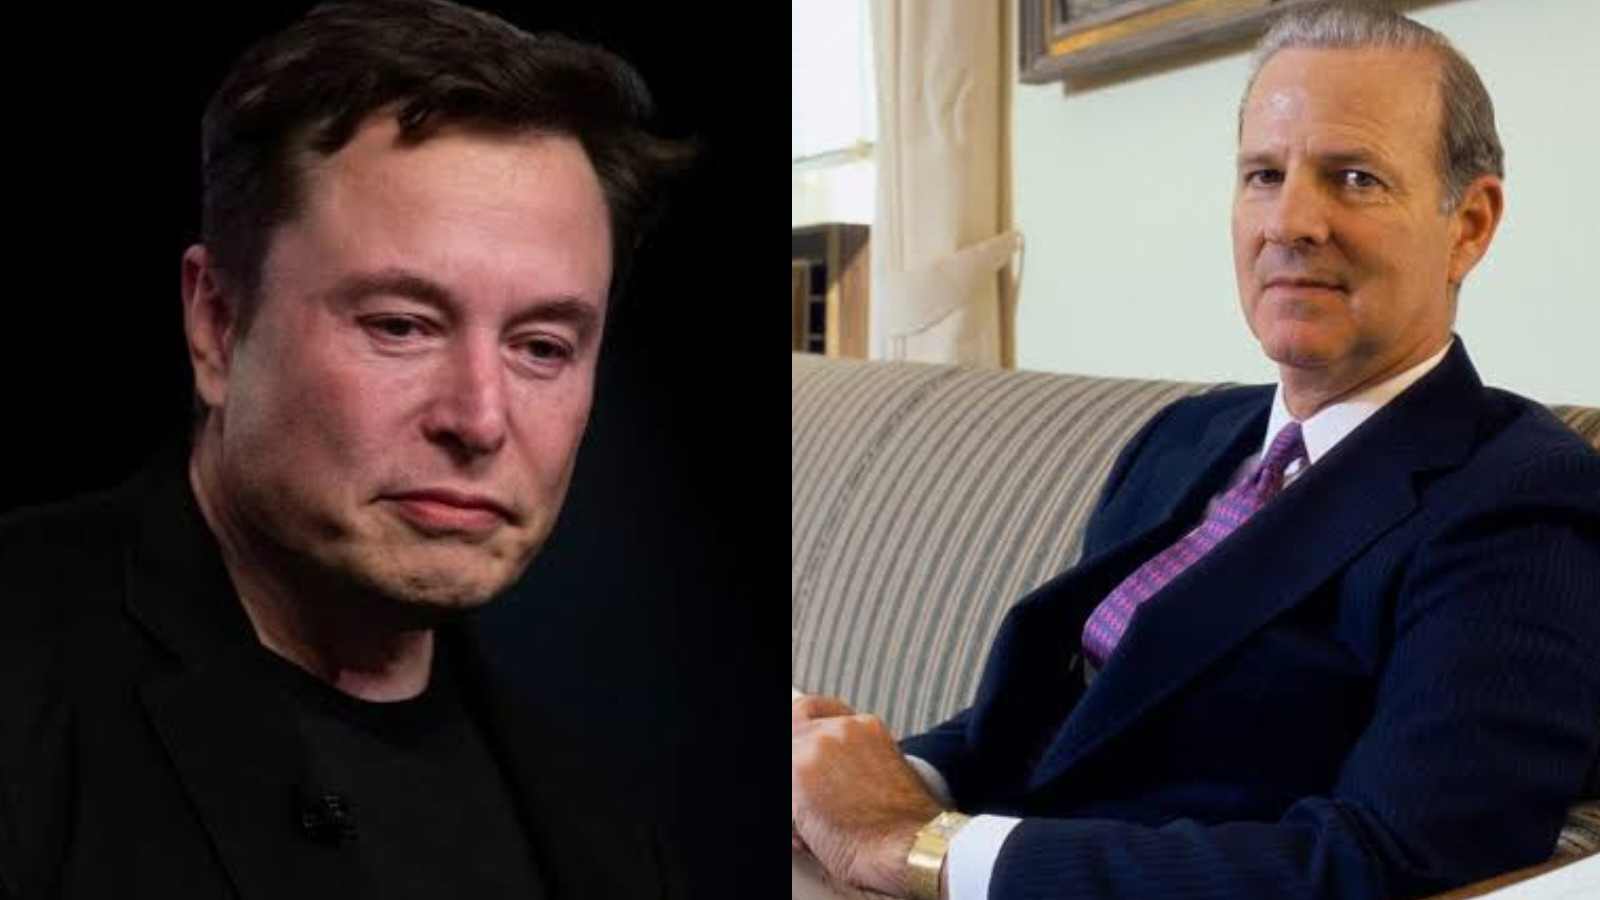 Elon Musk and the fired counsel James Baker